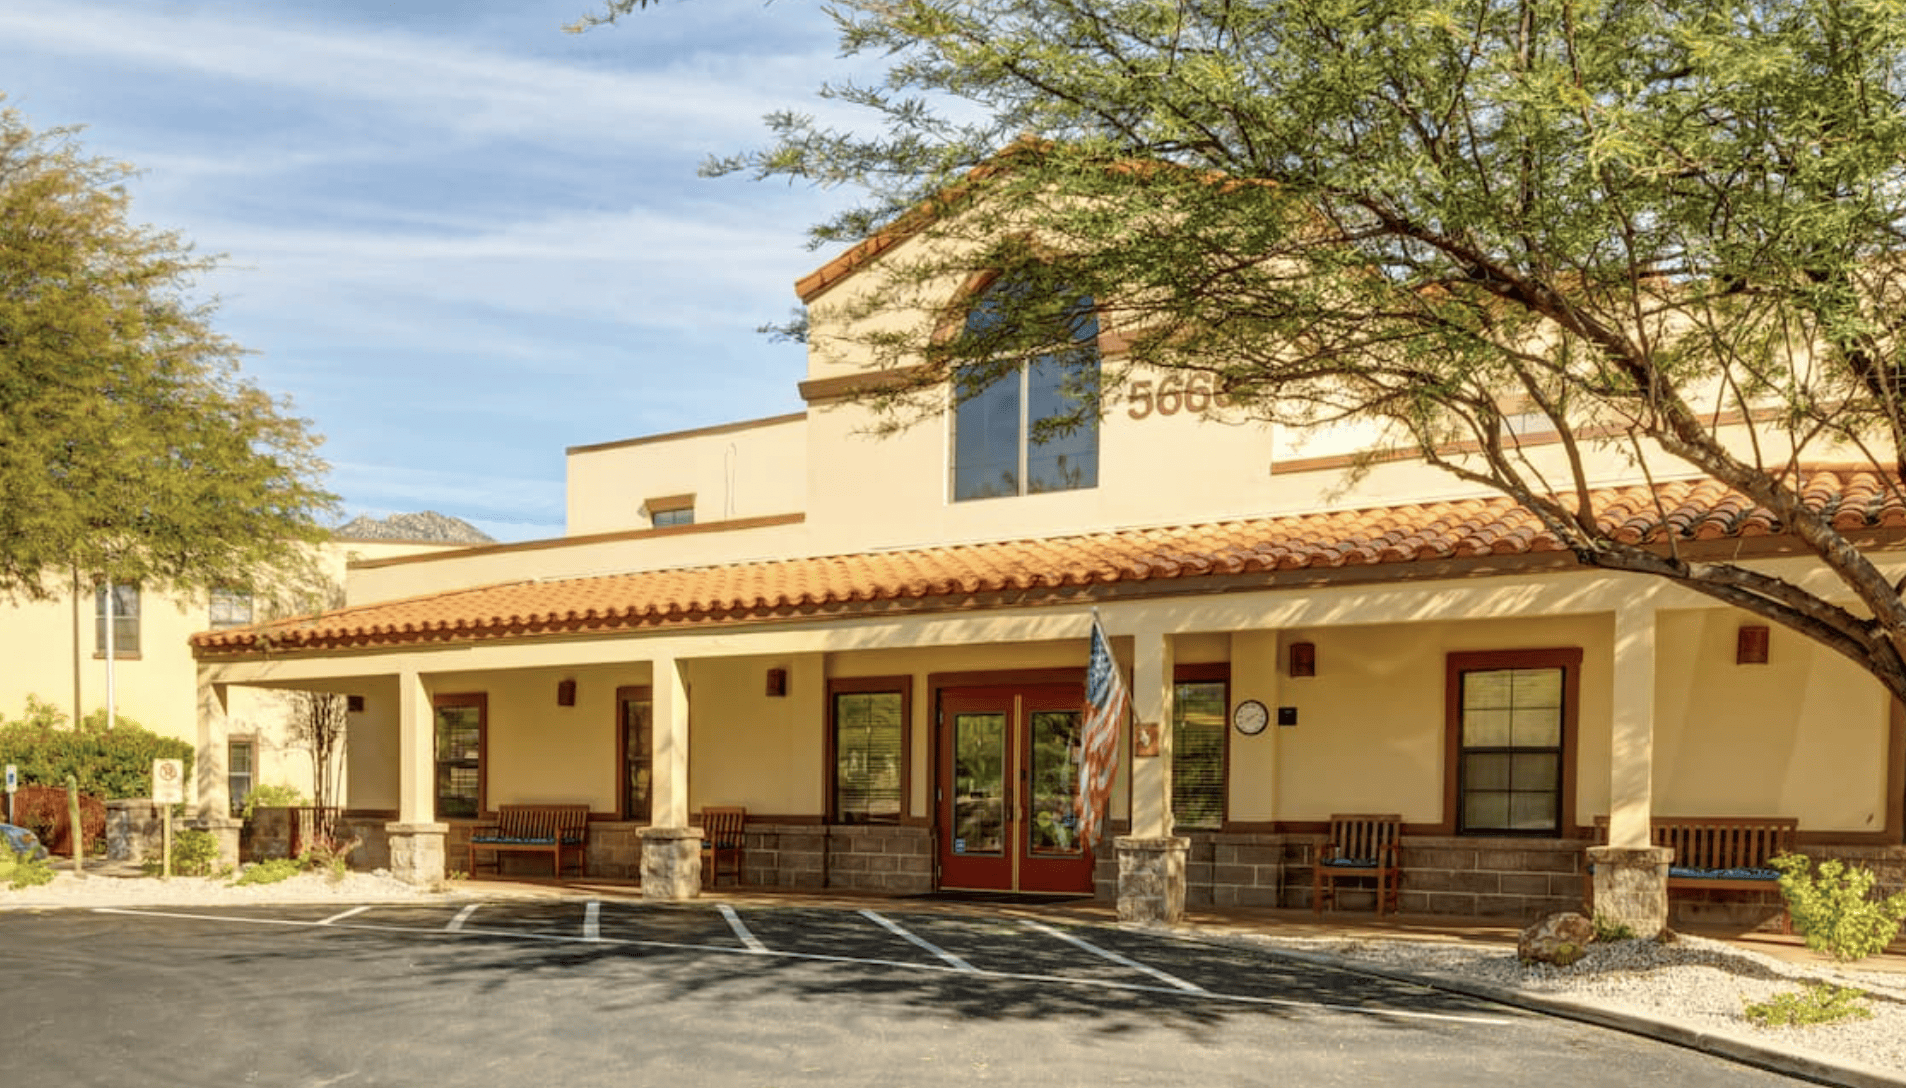 The front entrance of Tucson Place at Ventana Canyon.